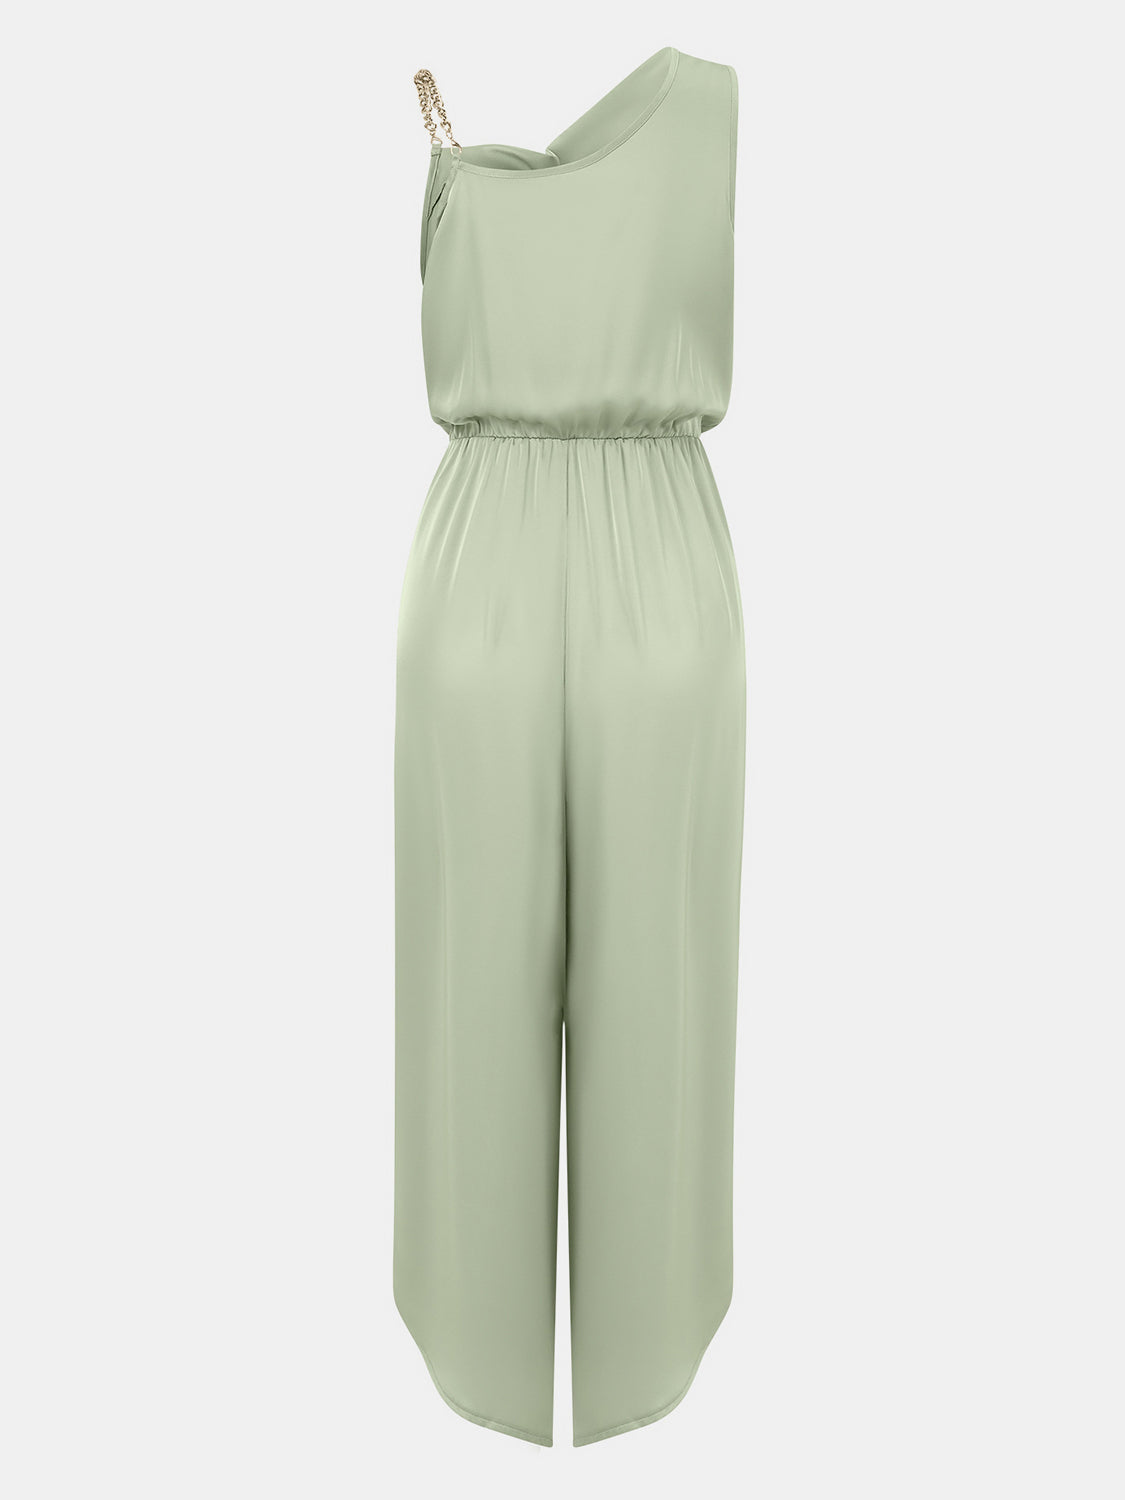 Women's Clothing, Chain Detail Asymmetrical Neck Jumpsuit, Front View Right Light Green, Rochelle's House